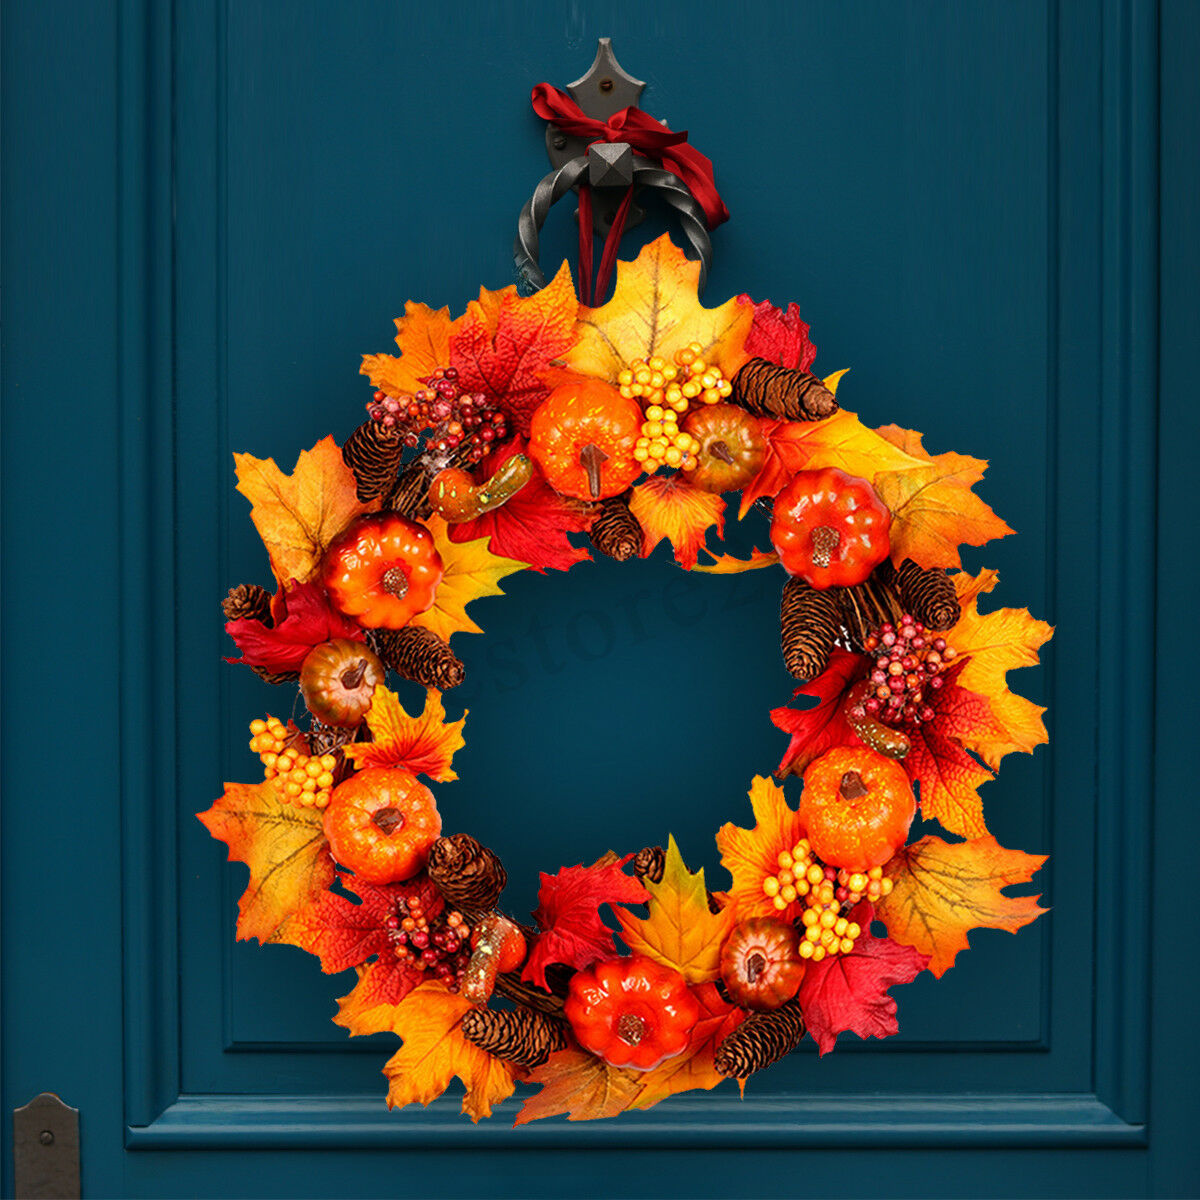 4560cm-Wreath-Garland-Maple-Leaves-Pumpkin-Door-For-Christmas-Party-Decorations-1637102-3